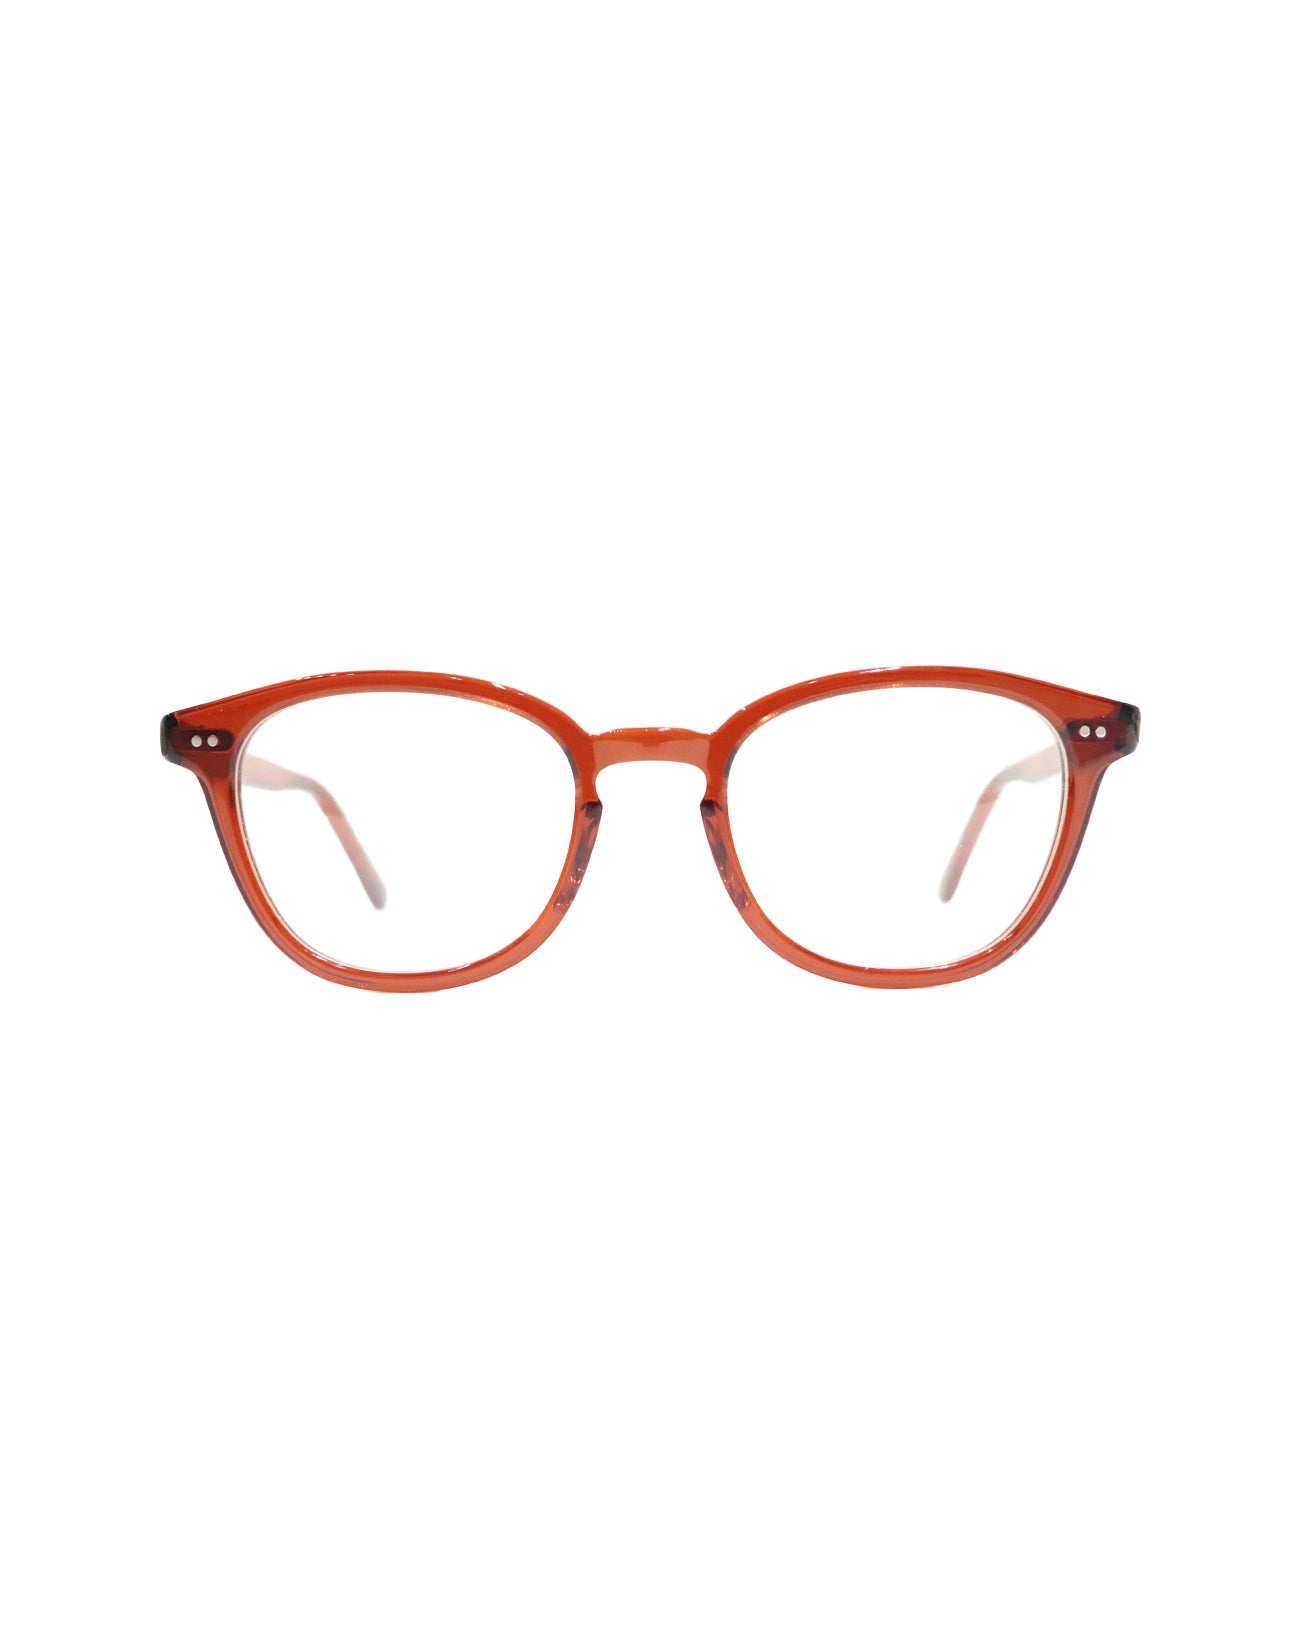 coit / clear brown / clear lens